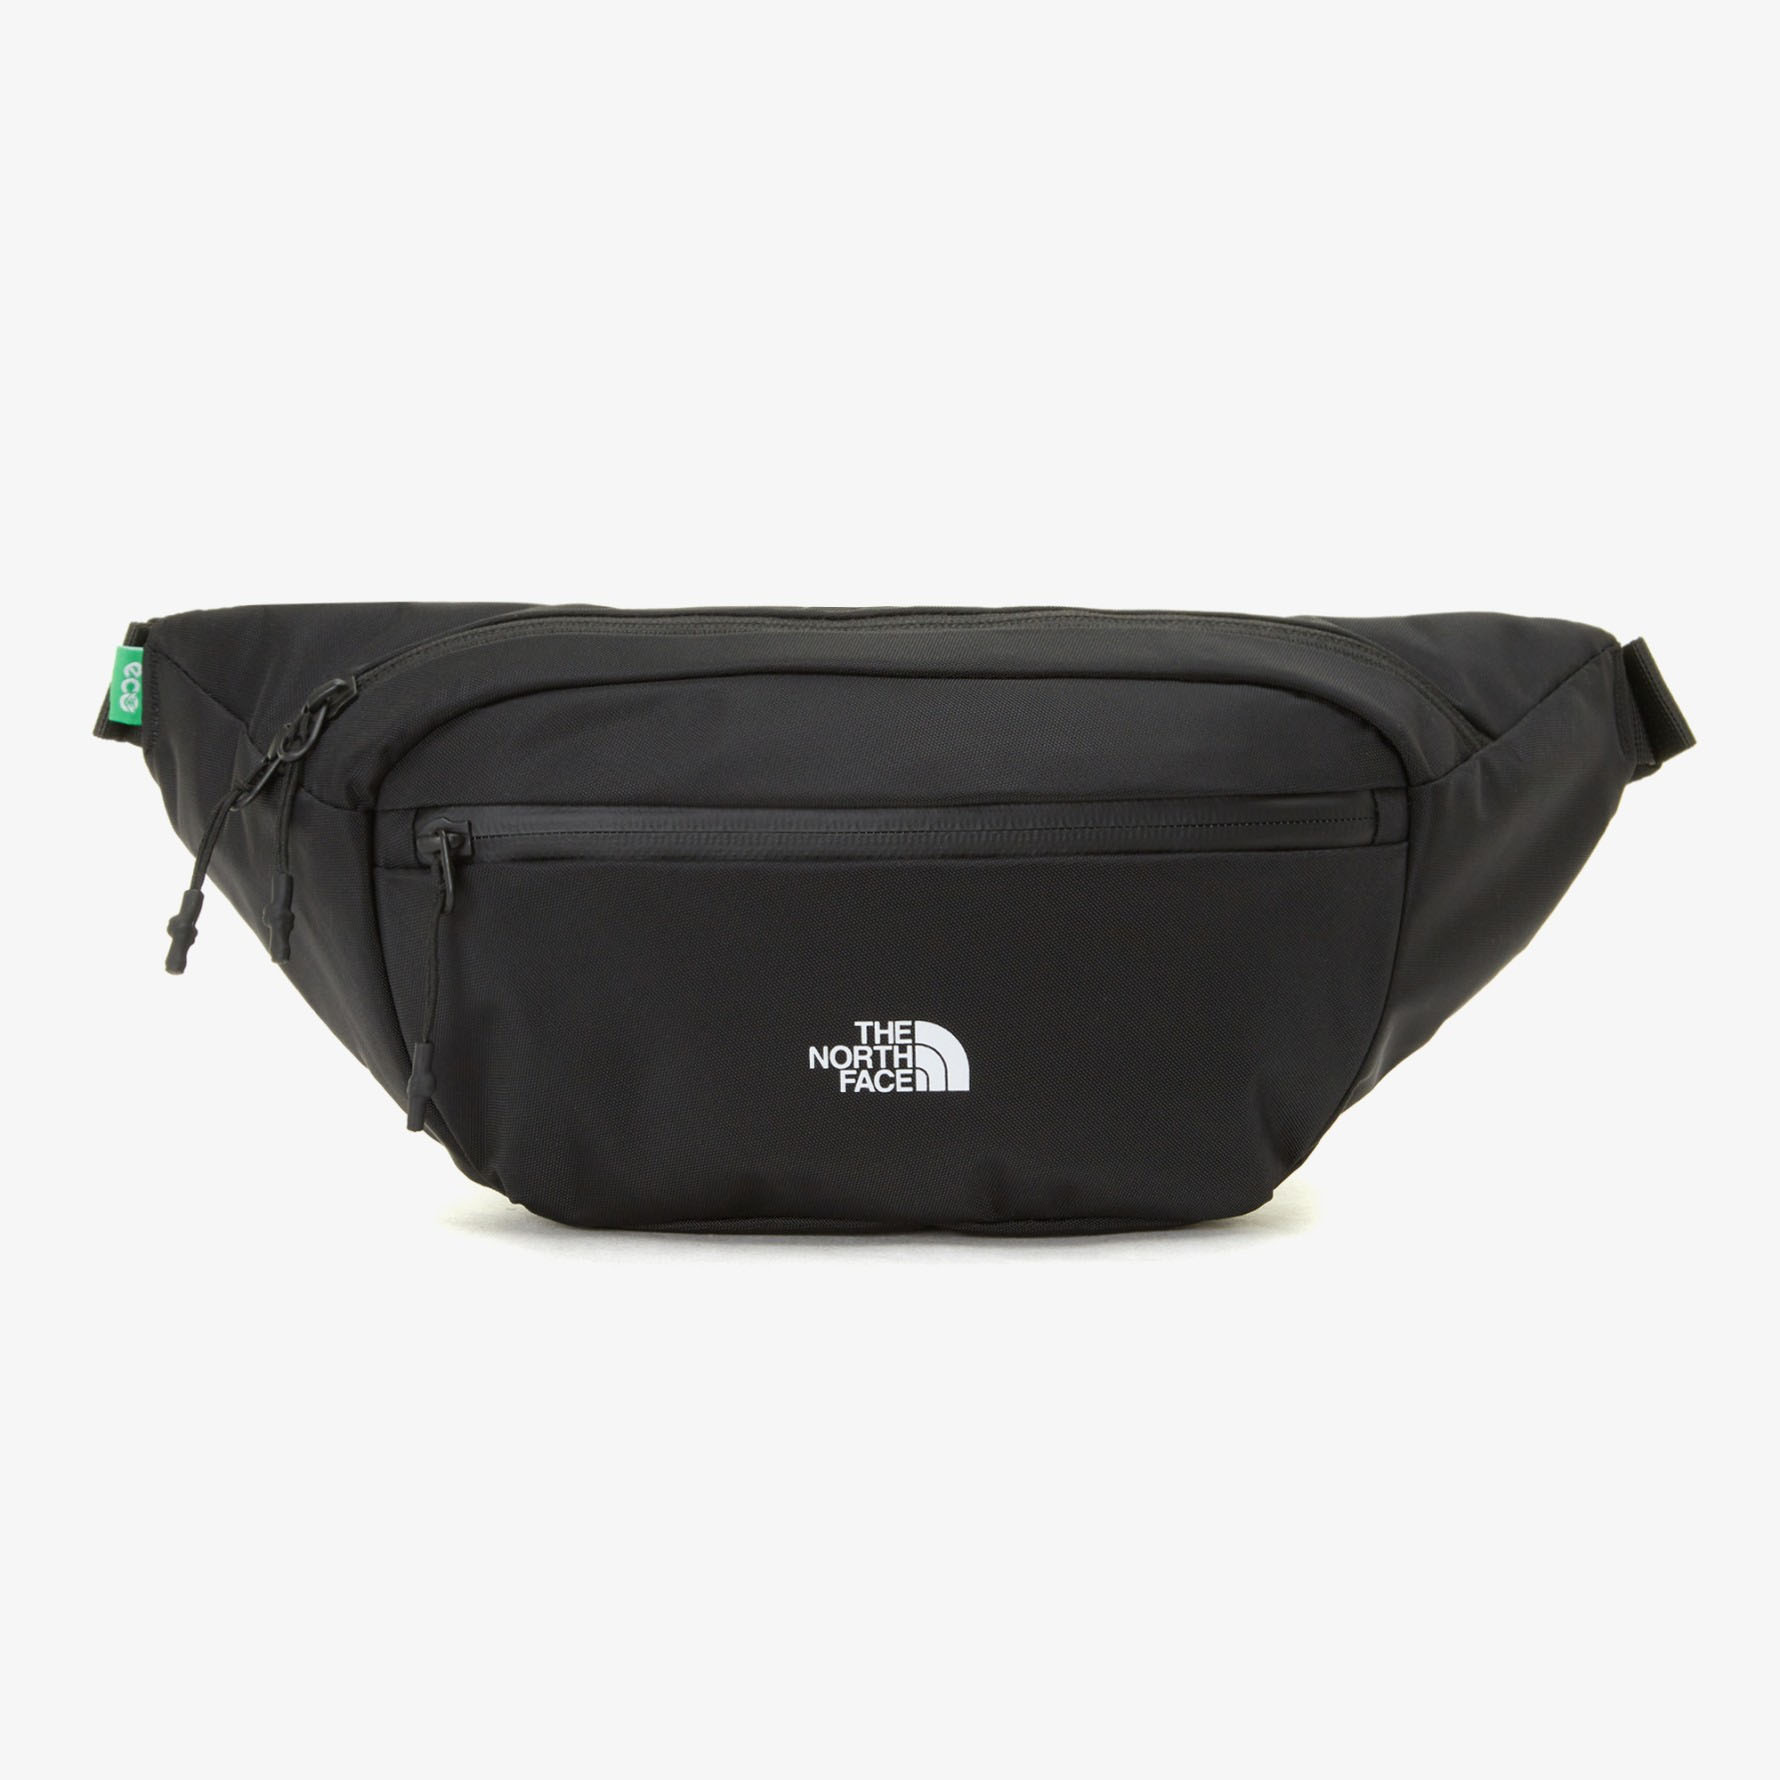 THE NORTH FACE ノースフェイス ウエストバッグ バッグ SIMPLE HIP SACK...